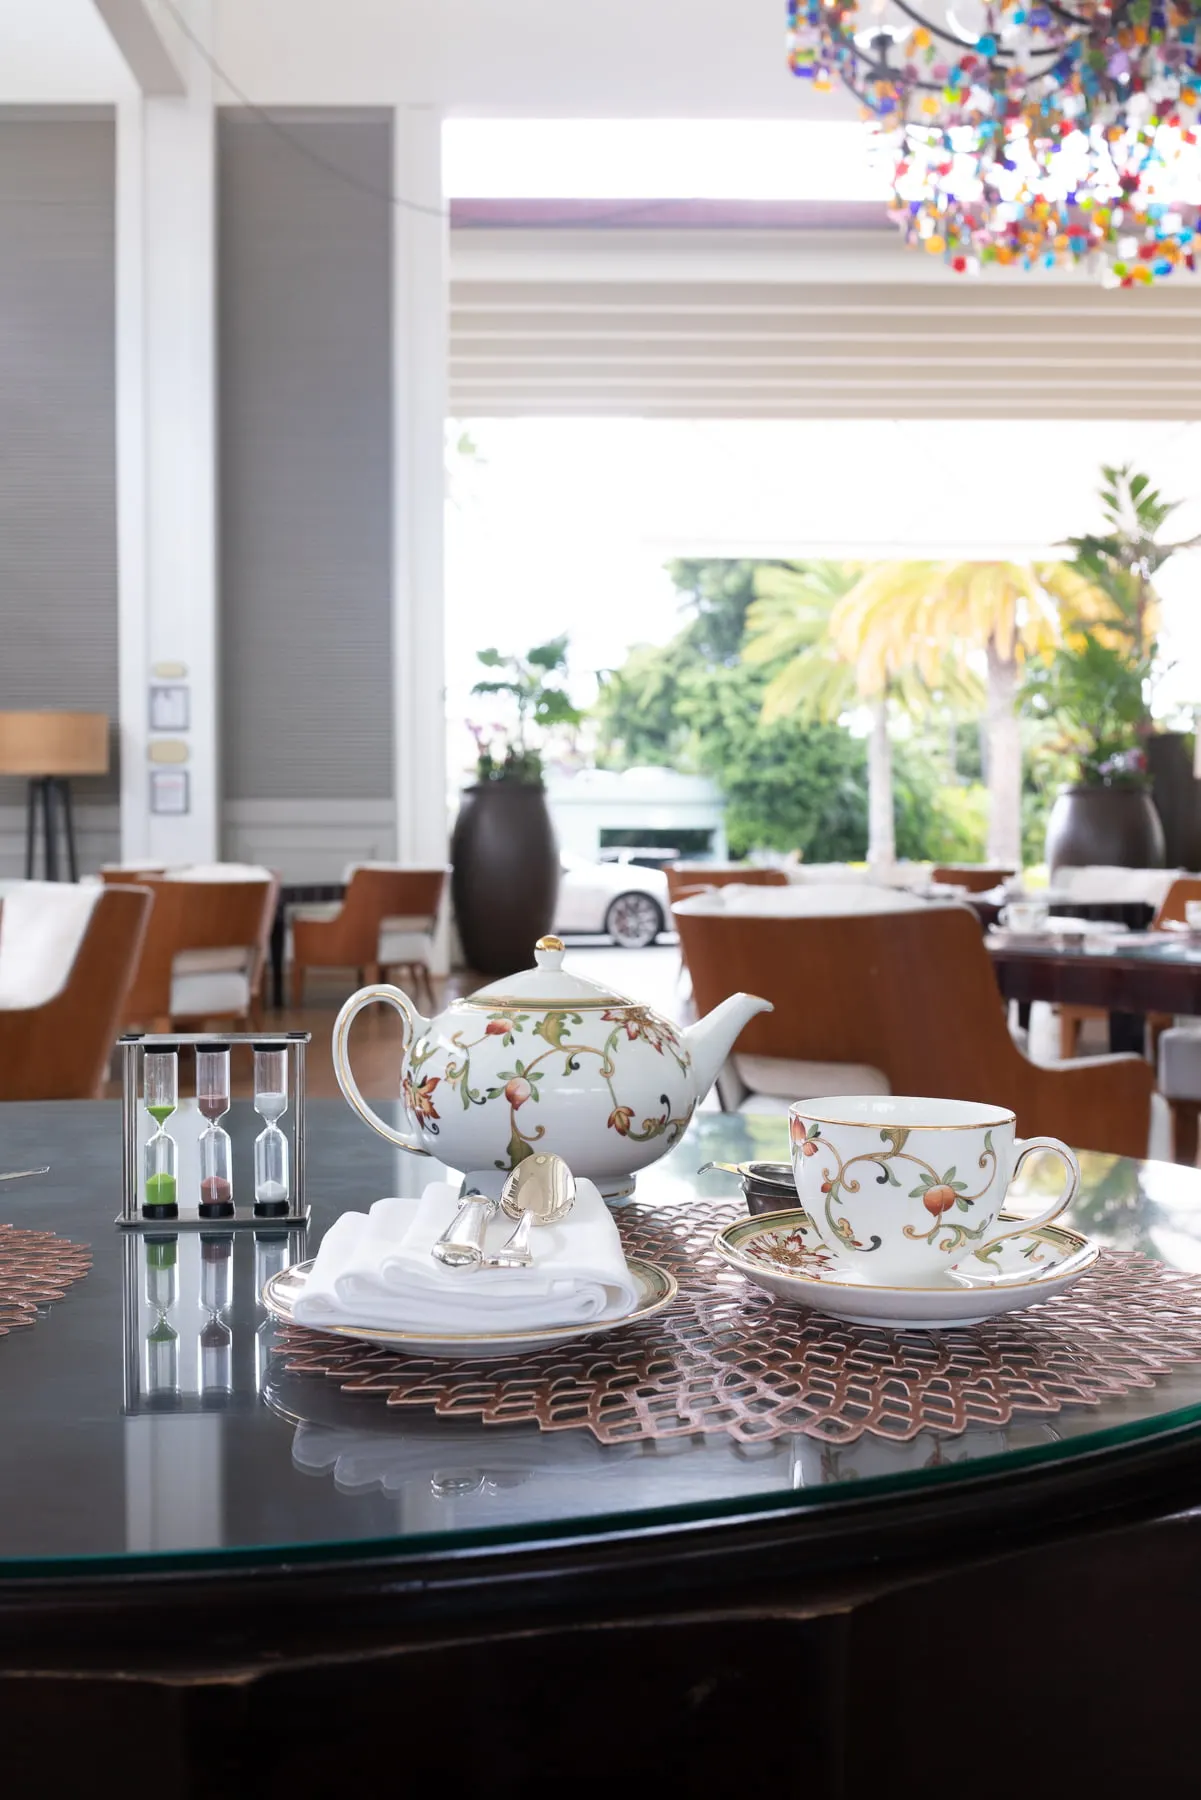 A cup of tea and teapot and plate at Kahala Hotel’s afternoon tea.